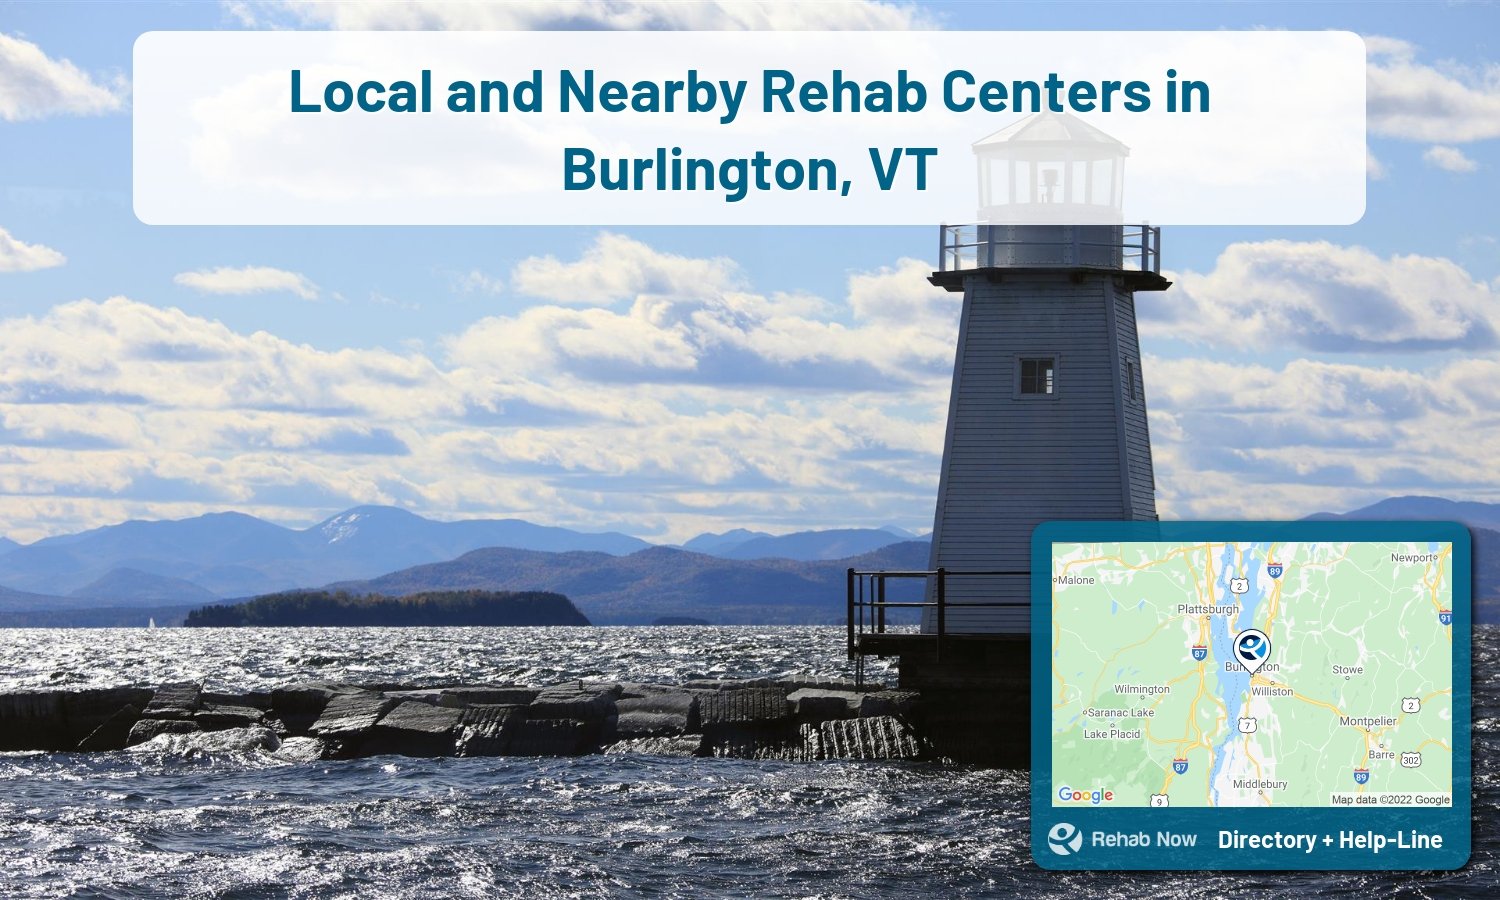 View options, availability, treatment methods, and more, for drug rehab and alcohol treatment in Burlington, Vermont